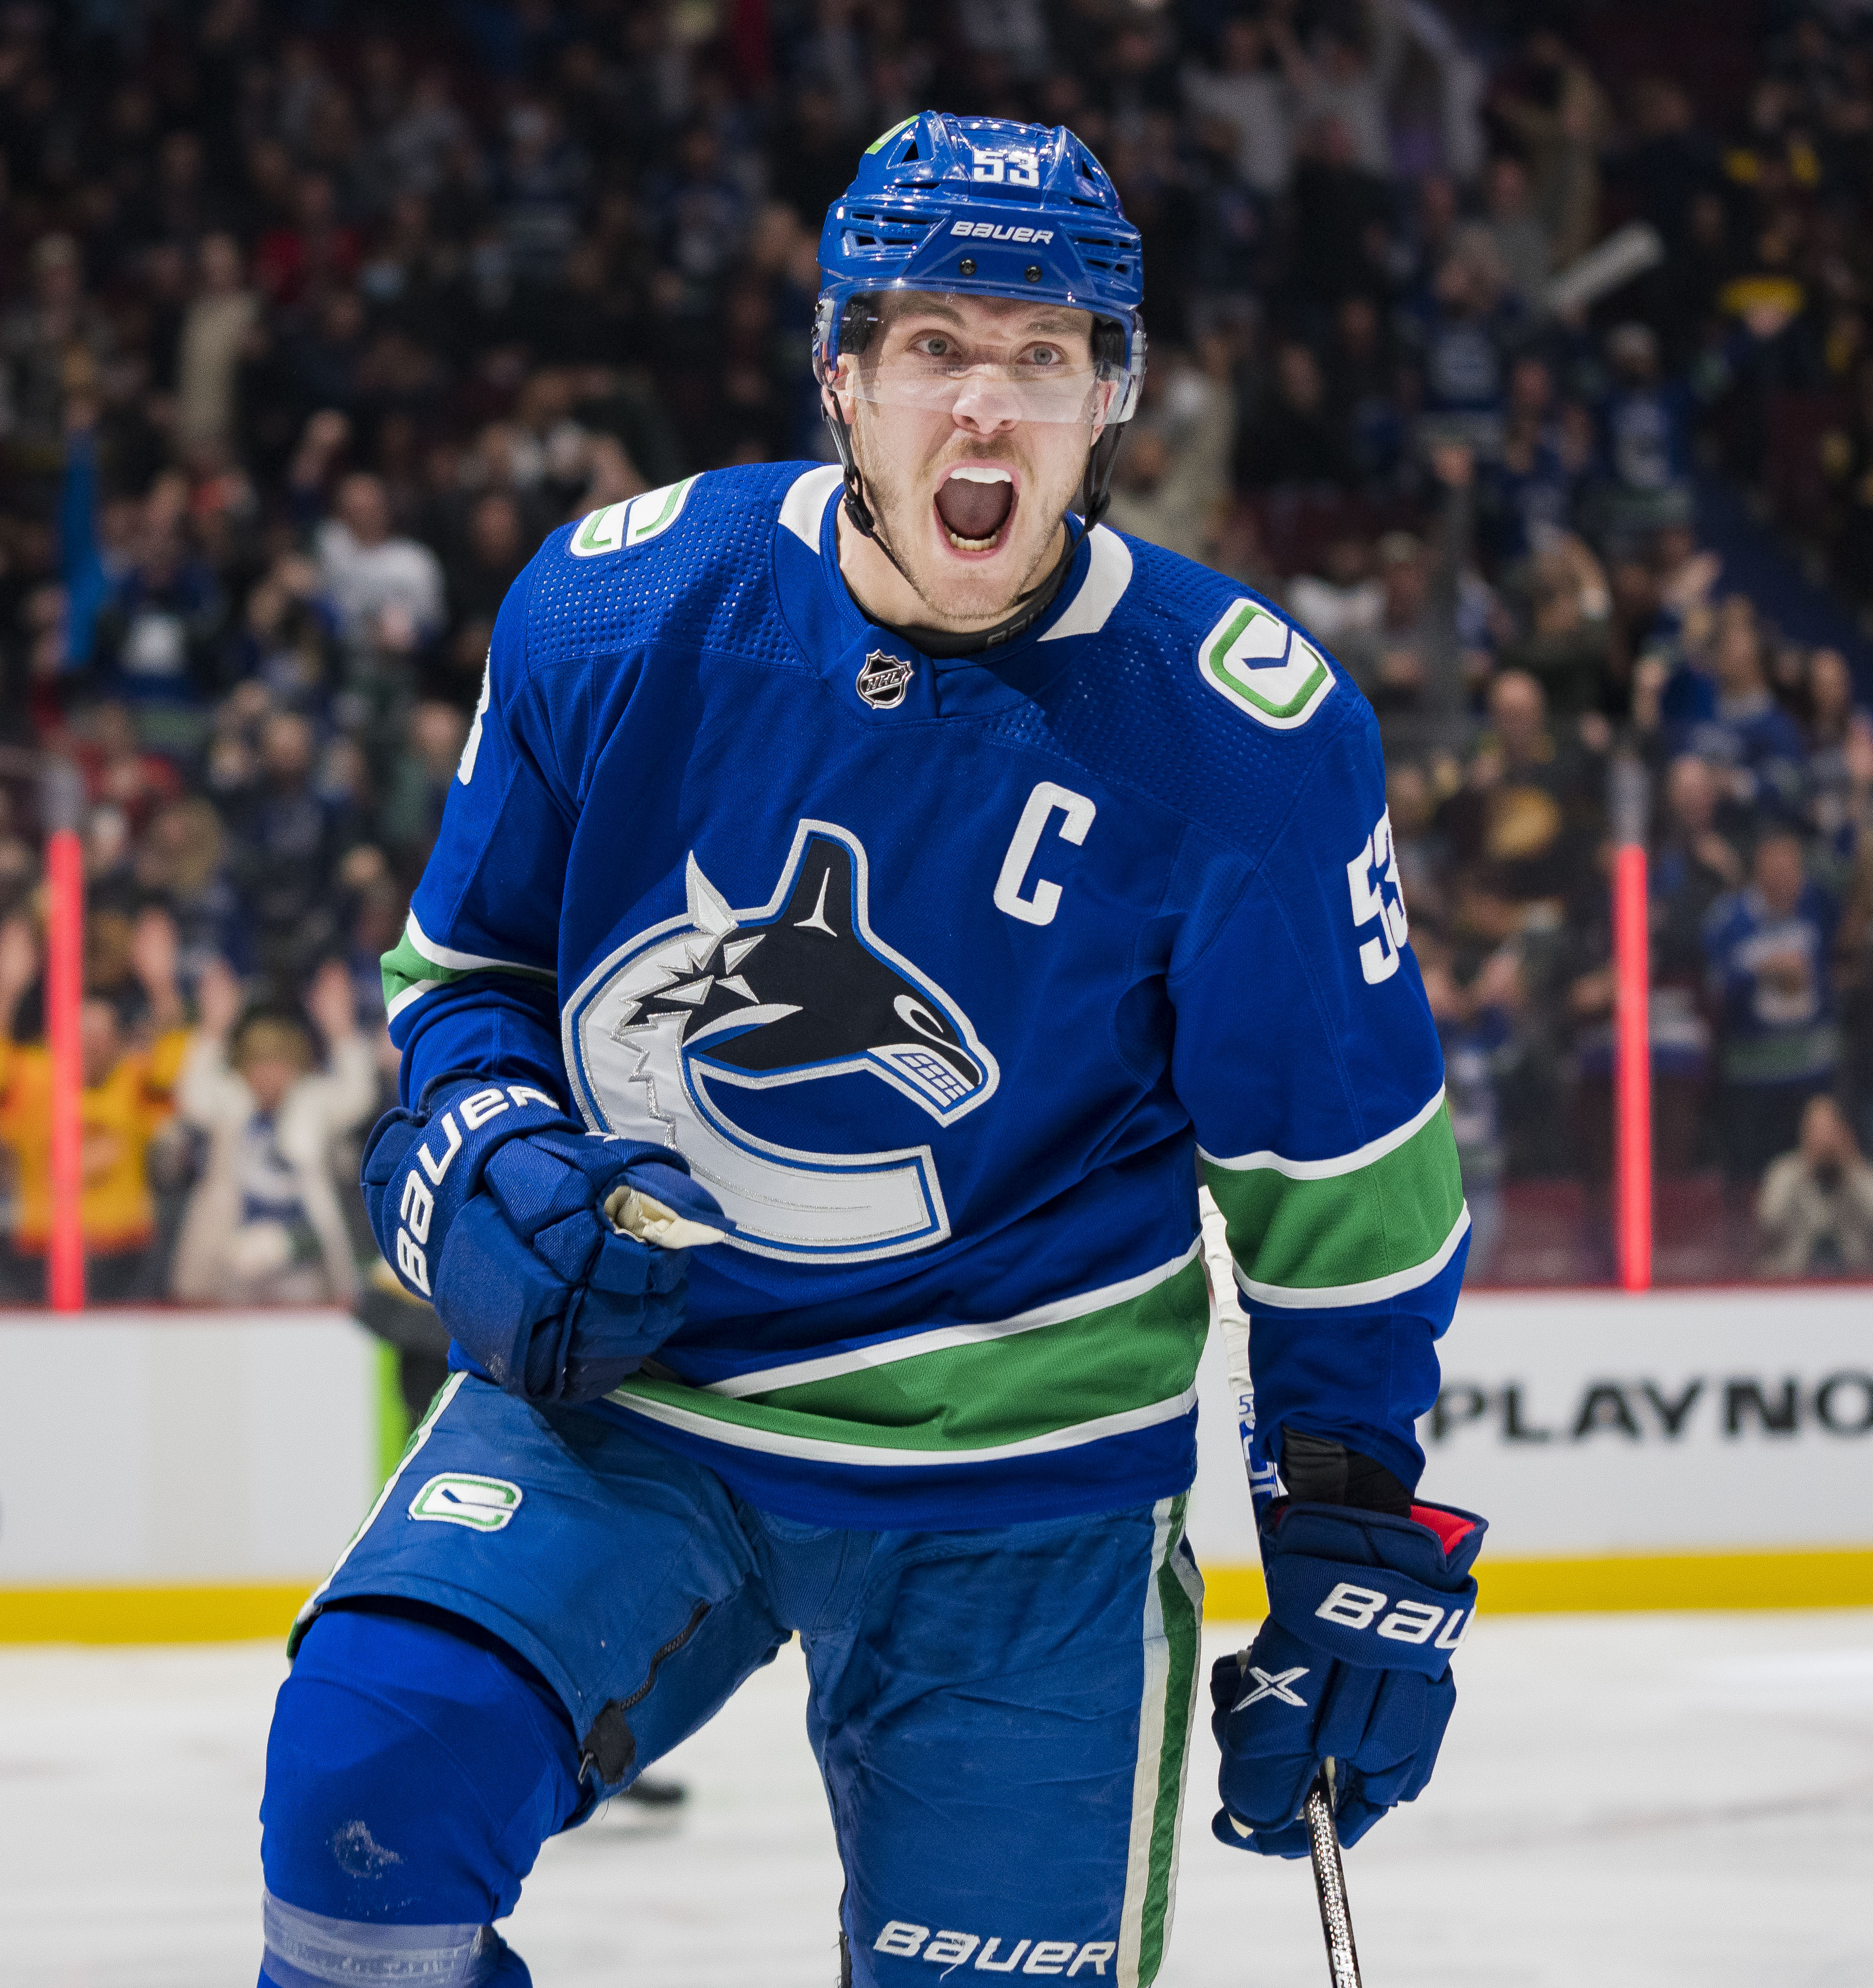 Canucks centre Bo Horvat available to play vs. Jets